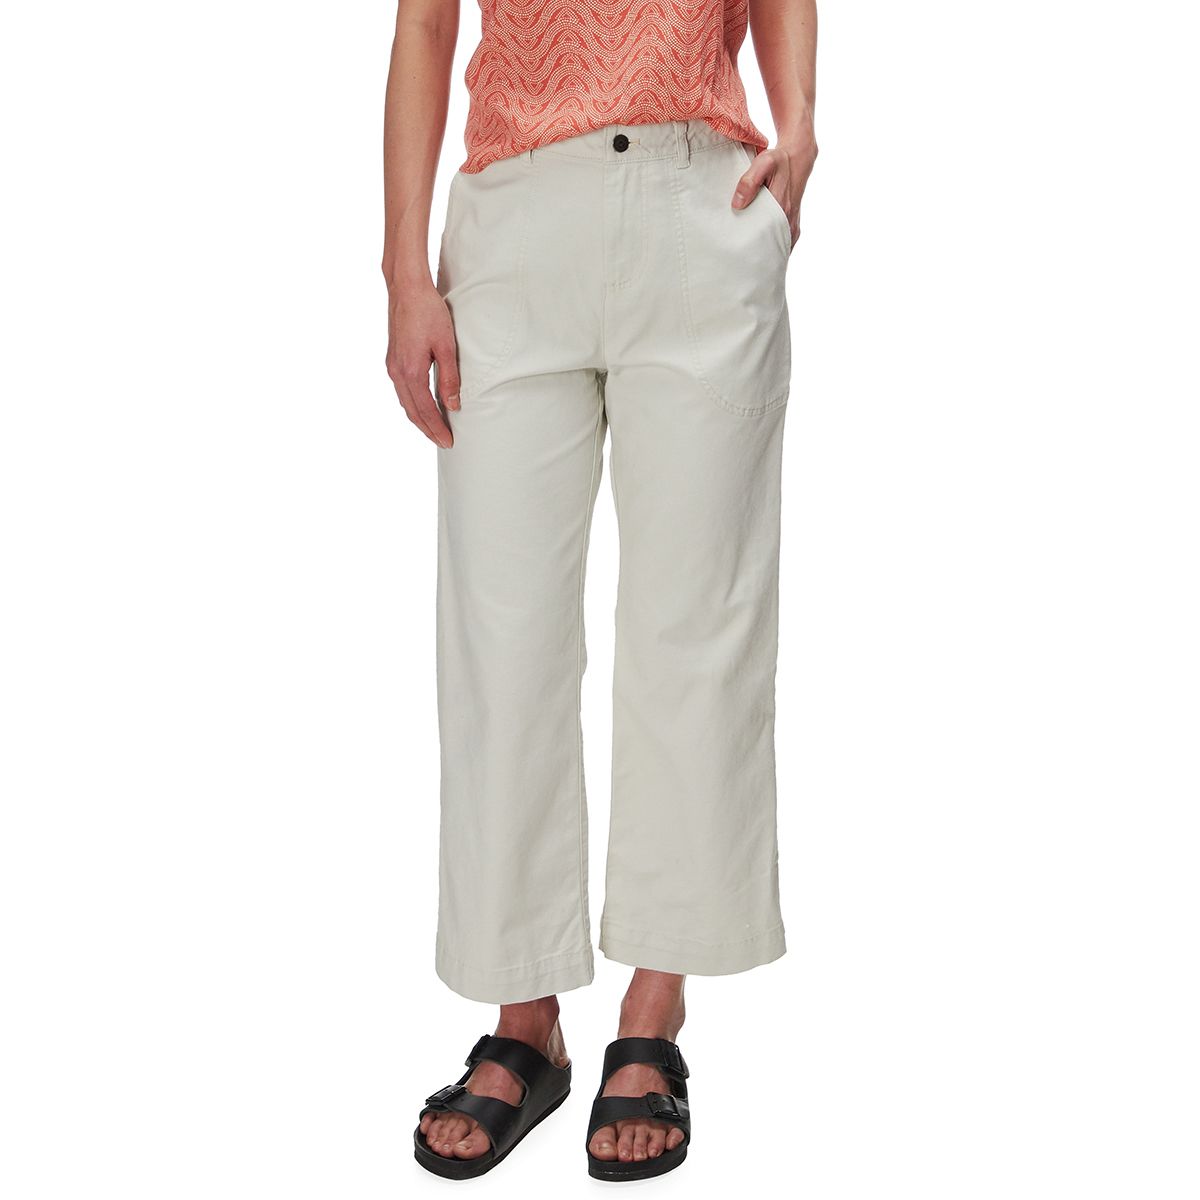 Patagonia Stand Up Cropped Pants - Women's - Women